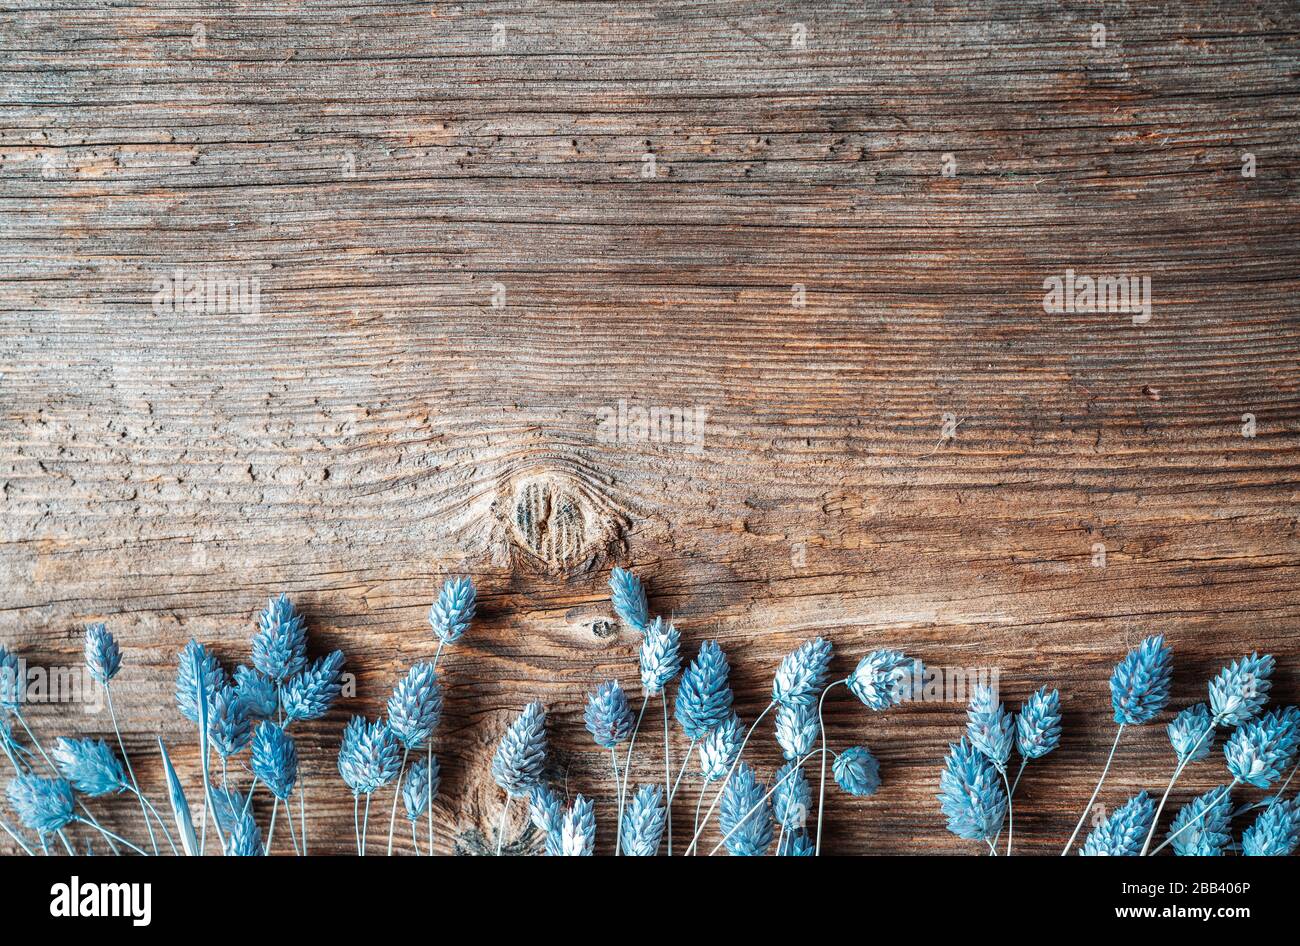 Dried blue grain spike flowers as frame ornaments on wooden background. Textured pattern concept Stock Photo